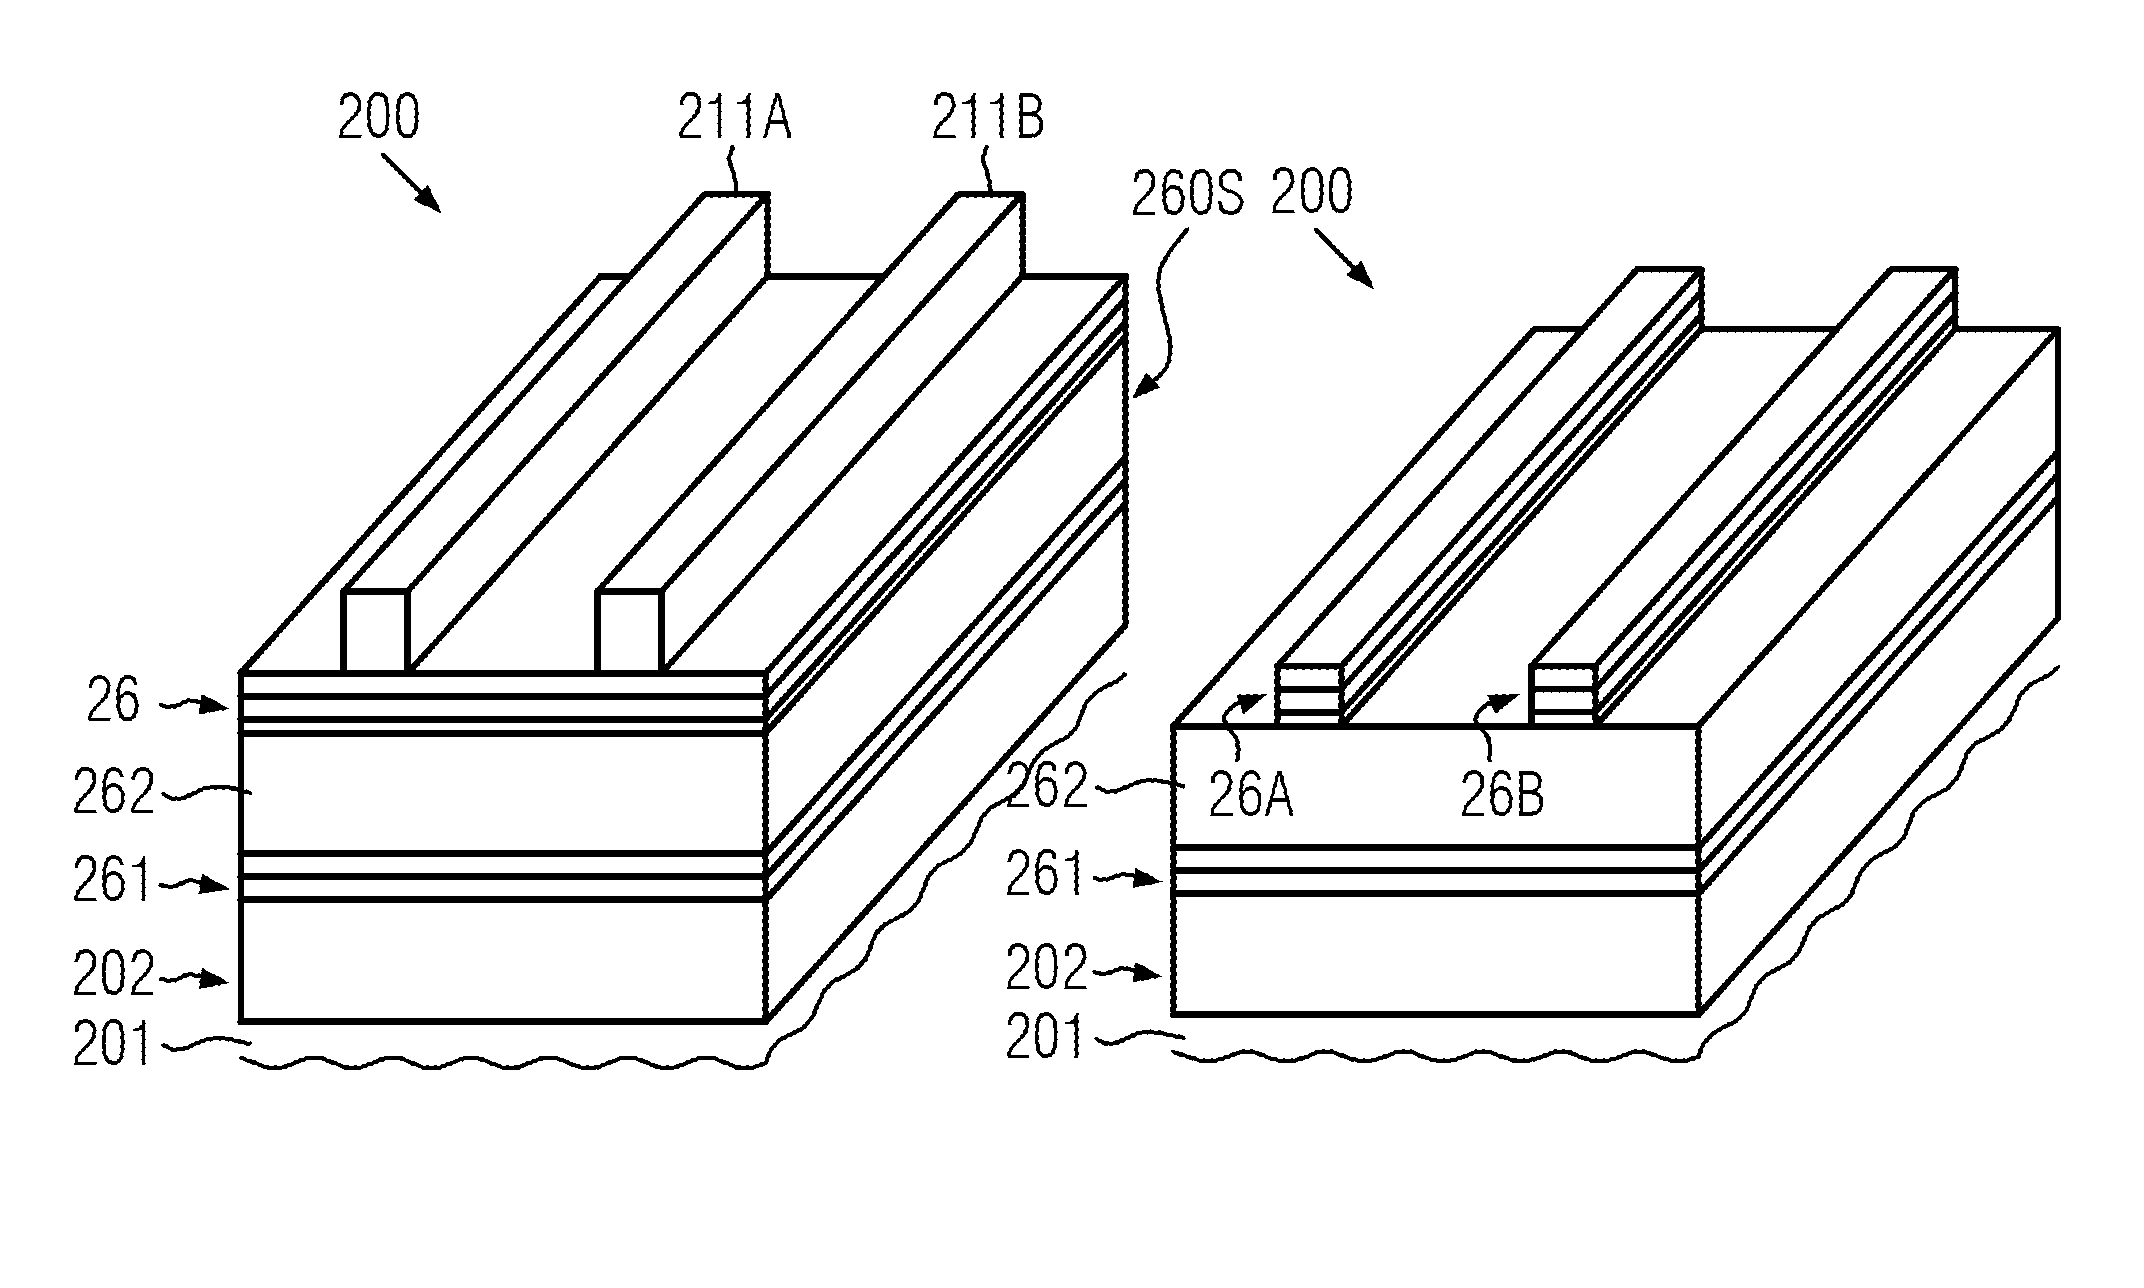 Gate electrode with a shrink spacer